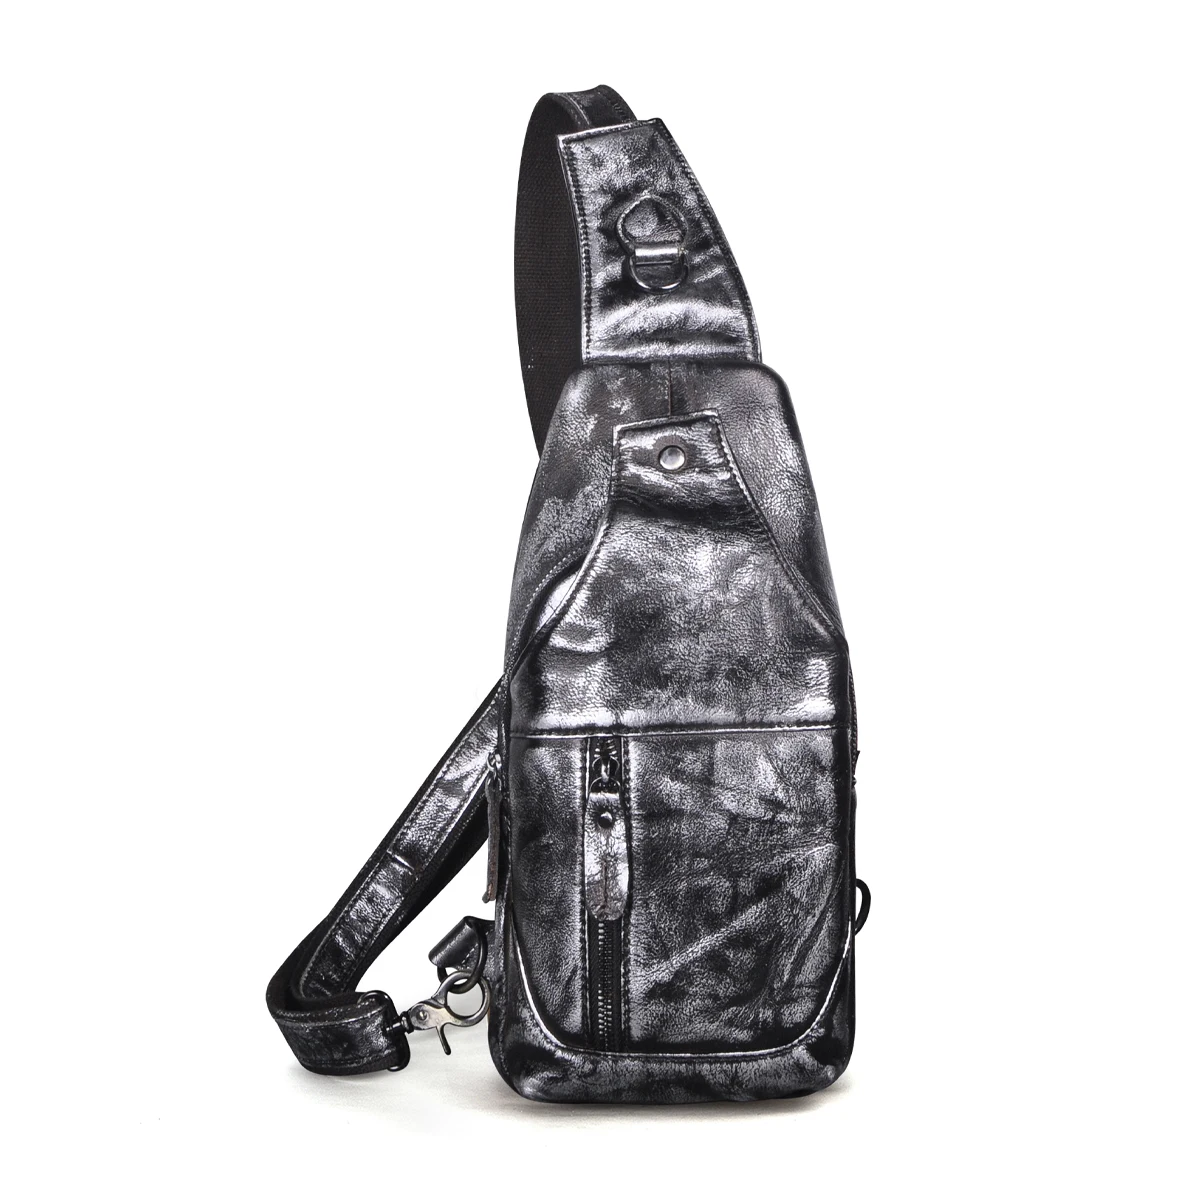 

High Quality Leather Casual Travel Chest Sling Bag Design Vintage One Shoulder Bag Cross-body Bag Day-pack For Male XB8088